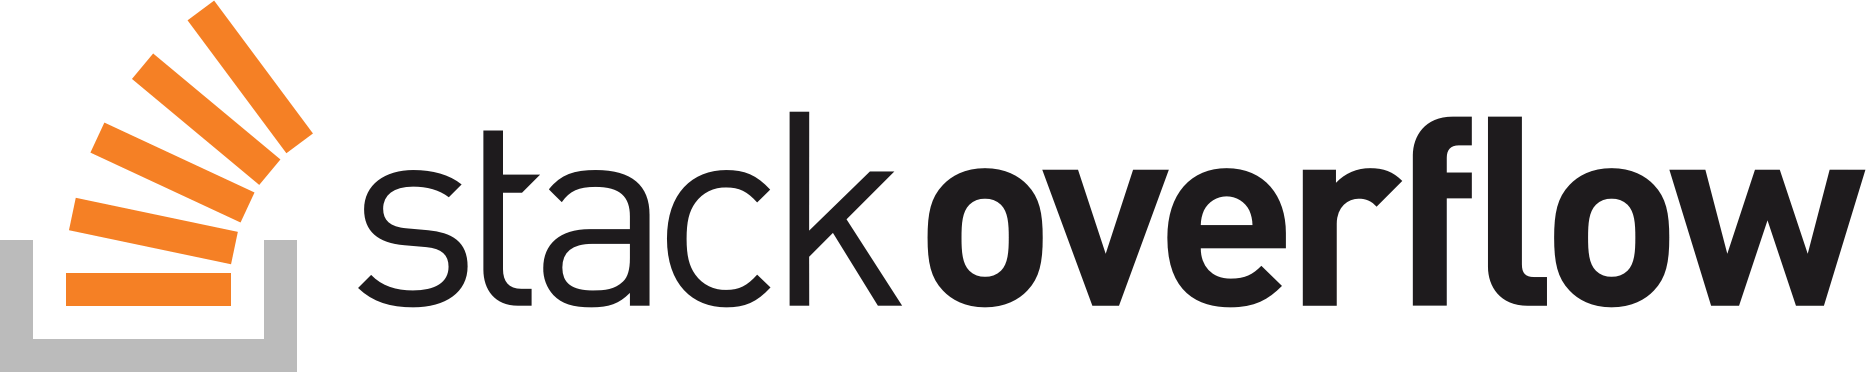 Paid job boards - Stack Overflow transparent png logo